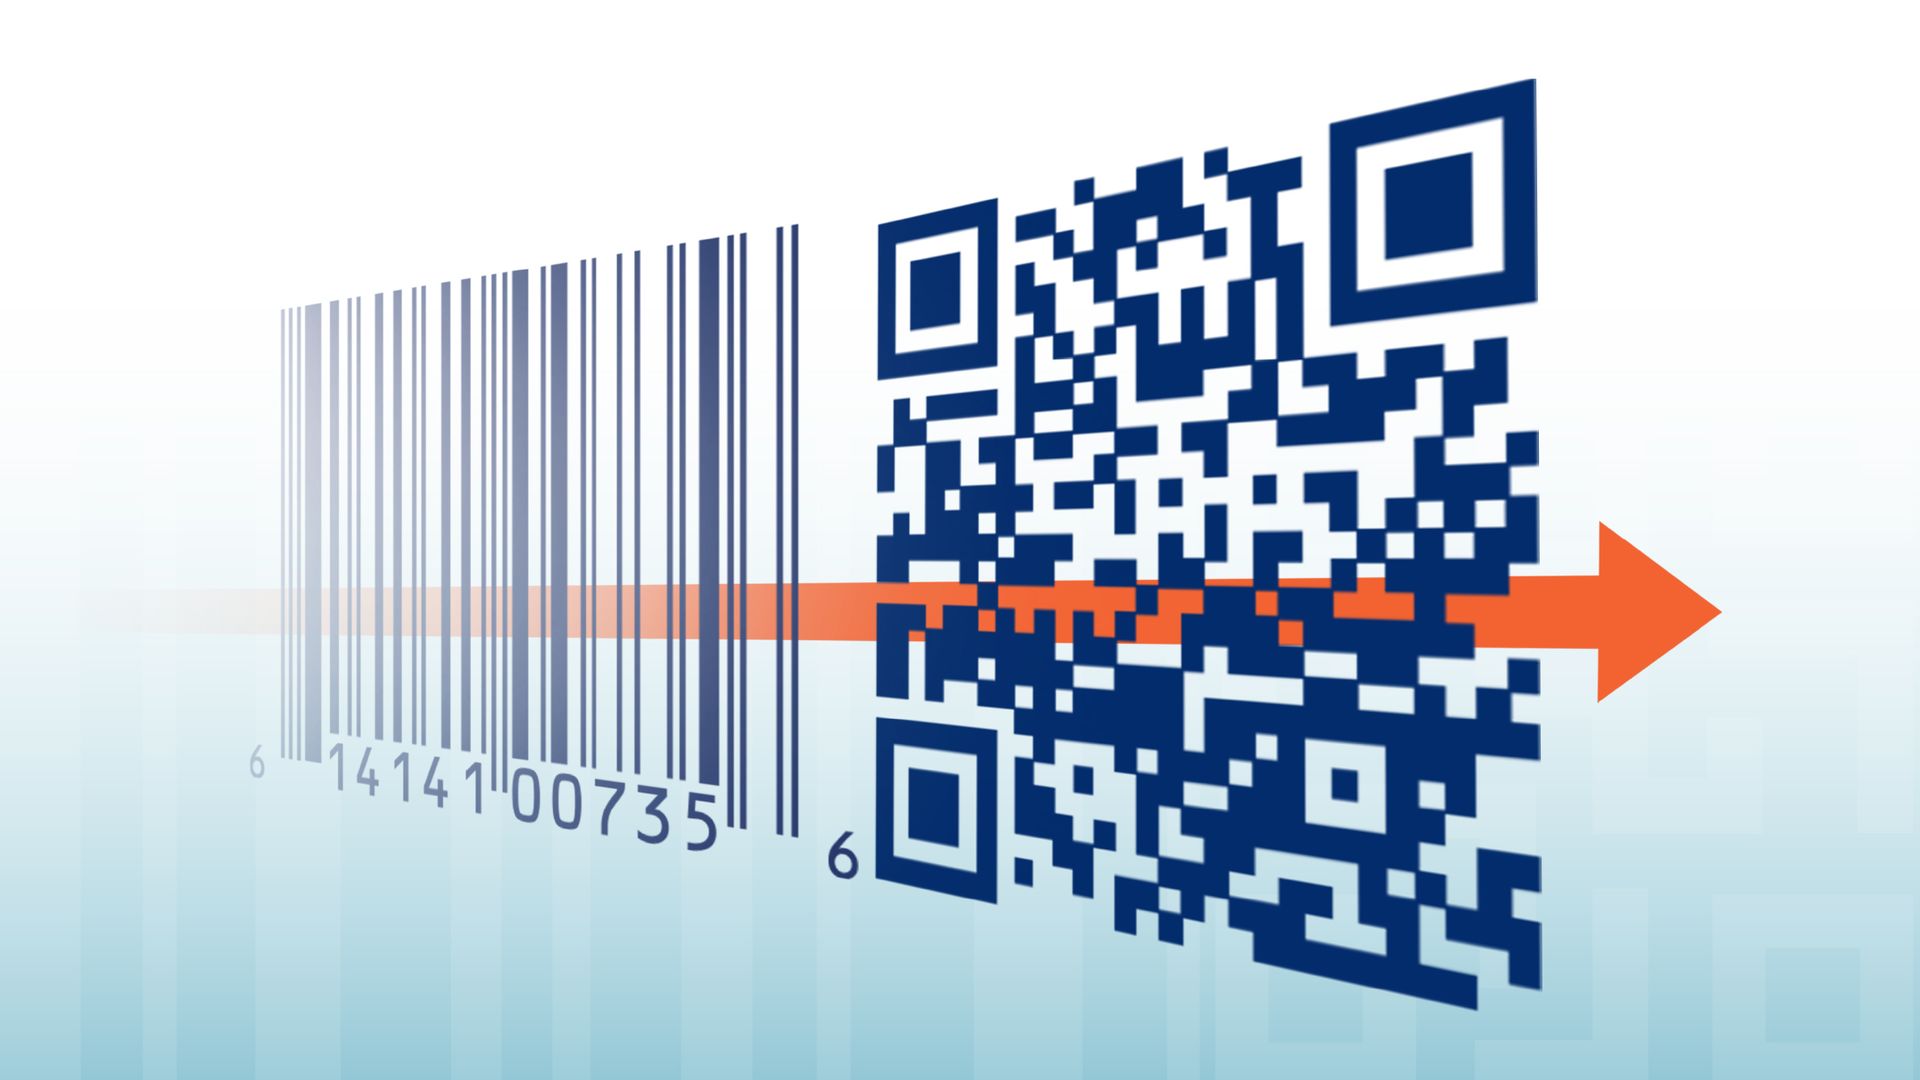 Two barcodes, side by side -- the existing UPC barcode on the left, and new "2D" barcodes on the right.